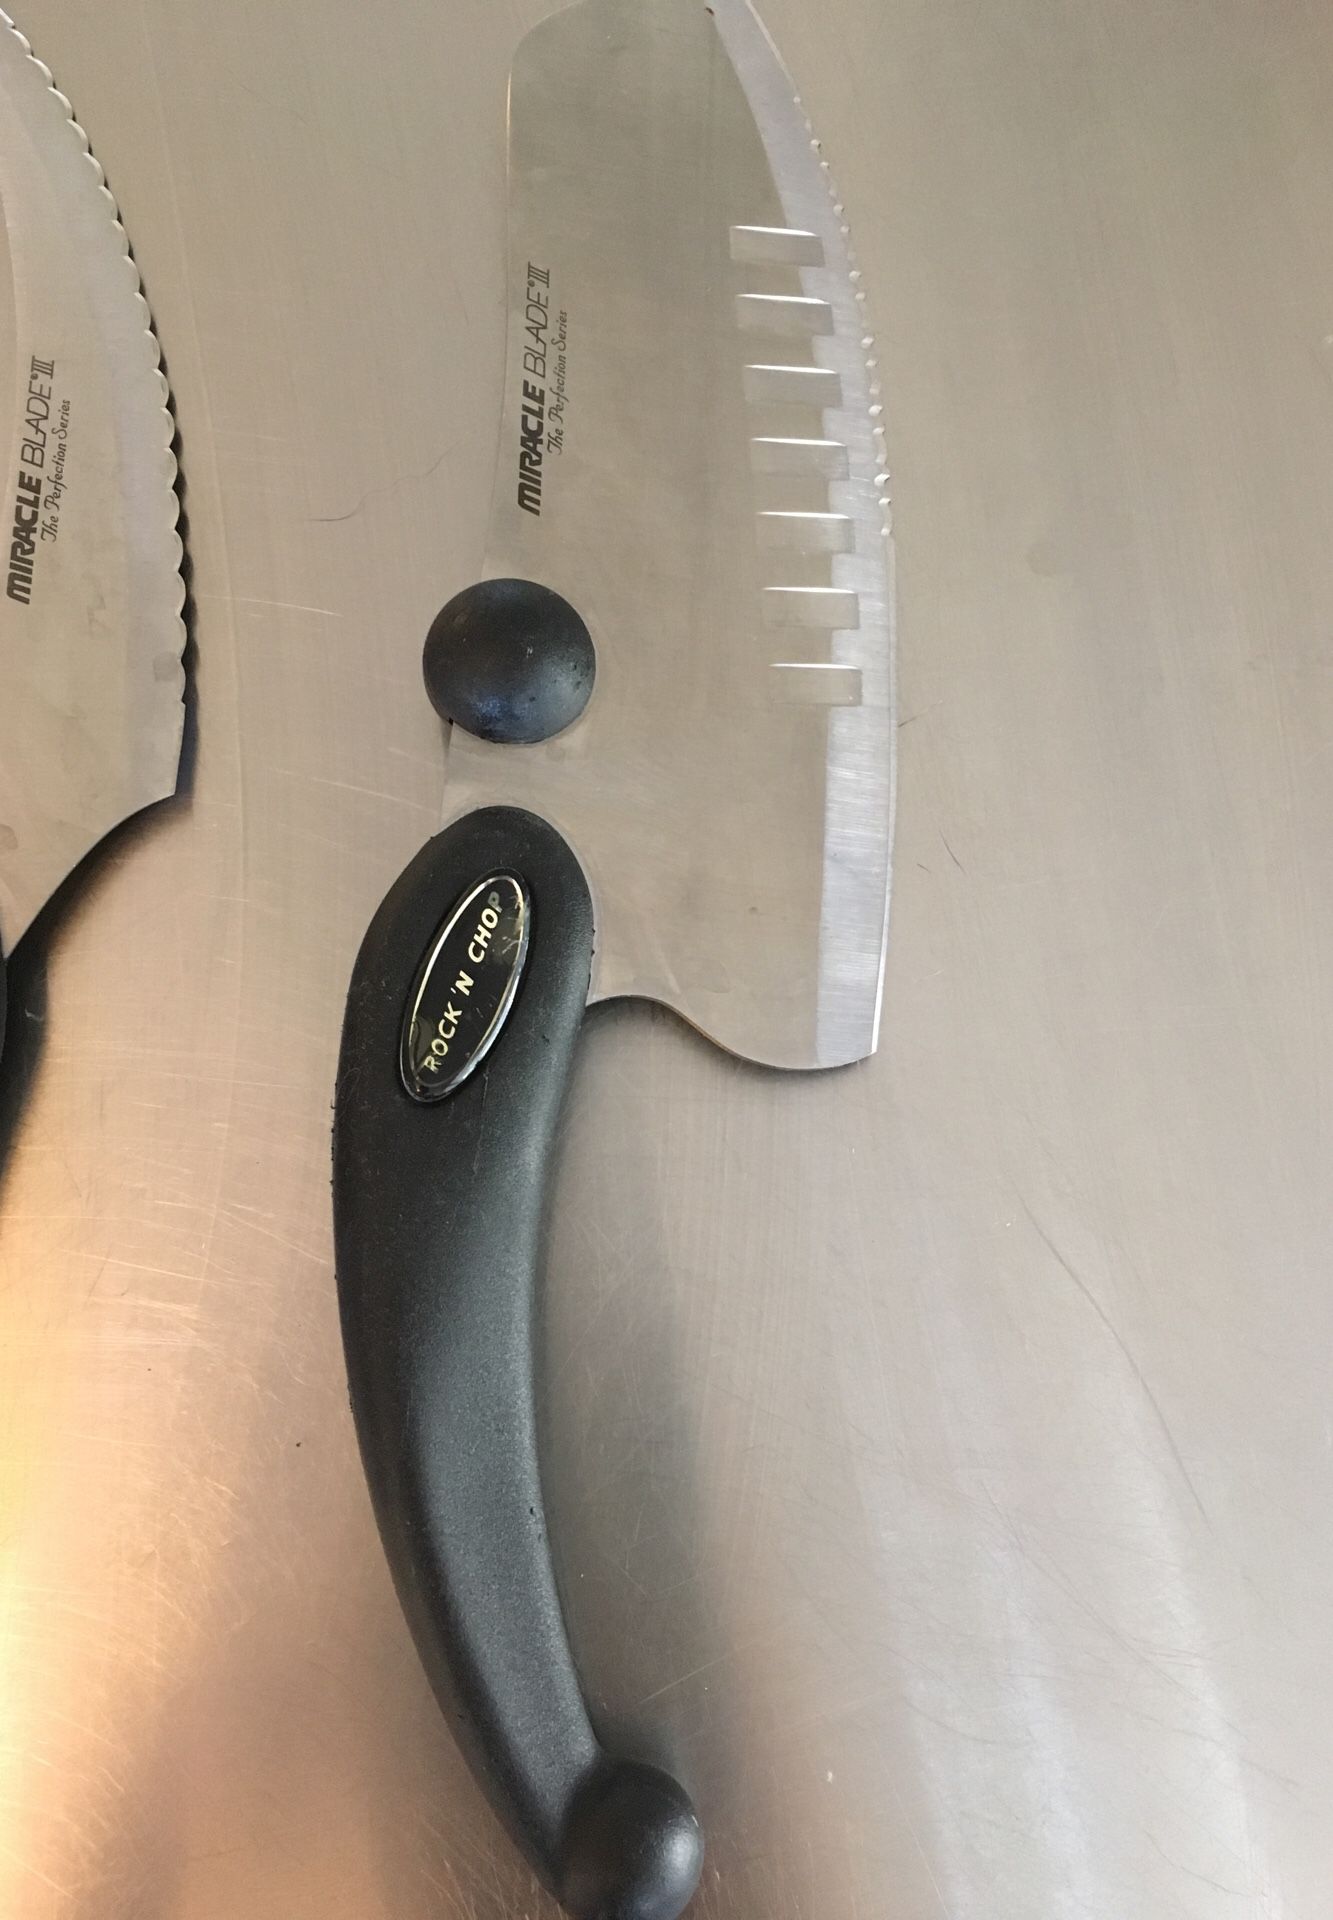 Miracle blade knifes(3) for Sale in San Jose, CA - OfferUp